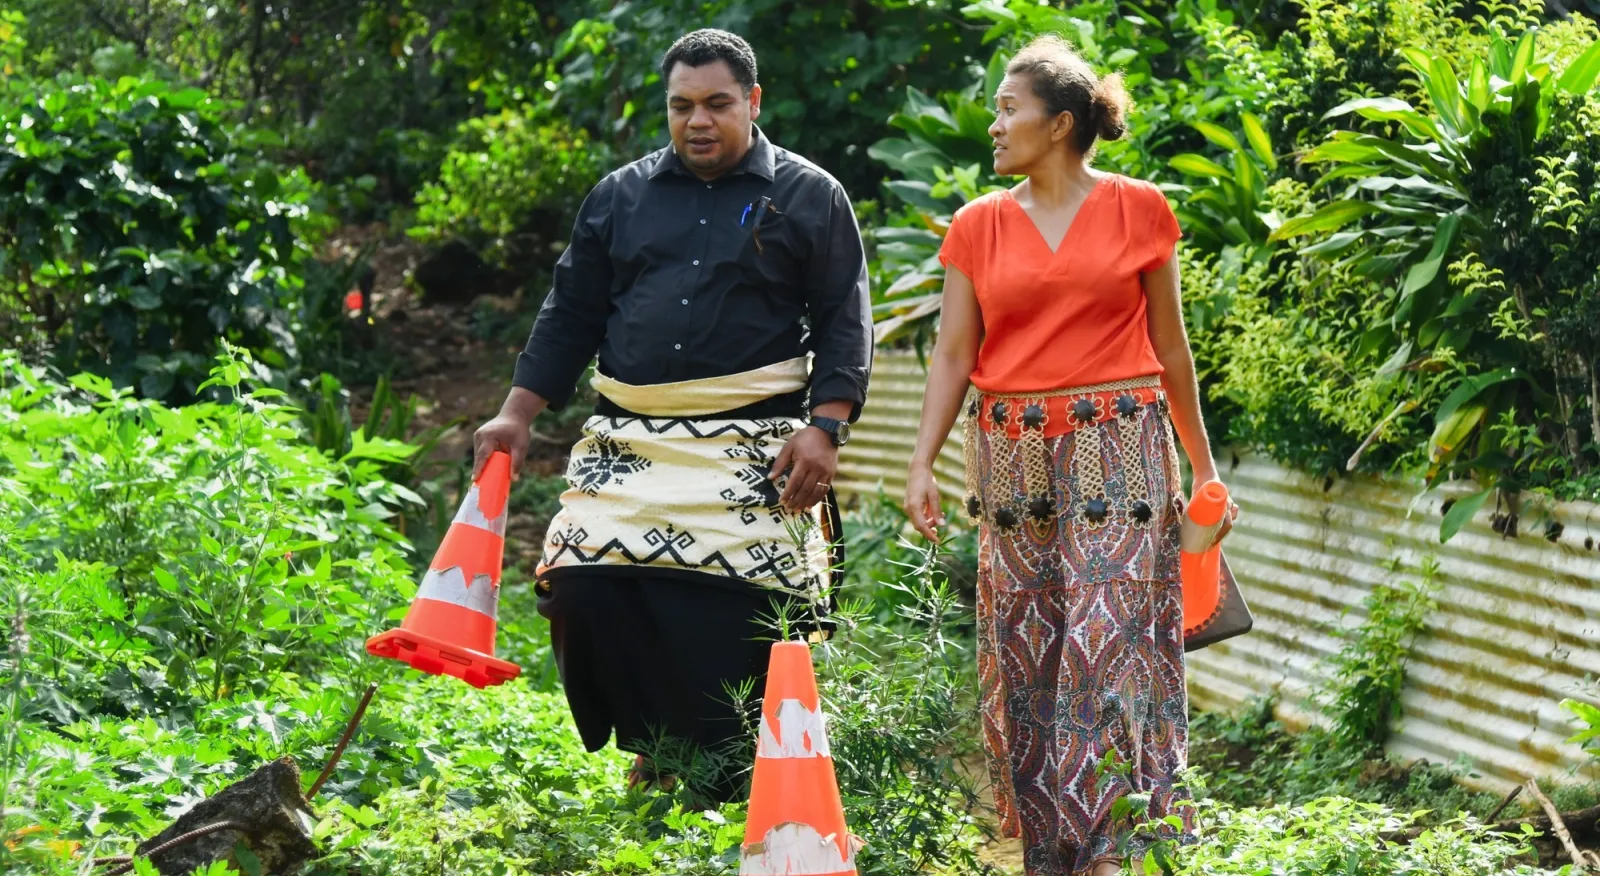 Two people in traditional Tongan dress are laying cones down on a very green, vegetated road. They are mid-discussion and not looking at the camera.